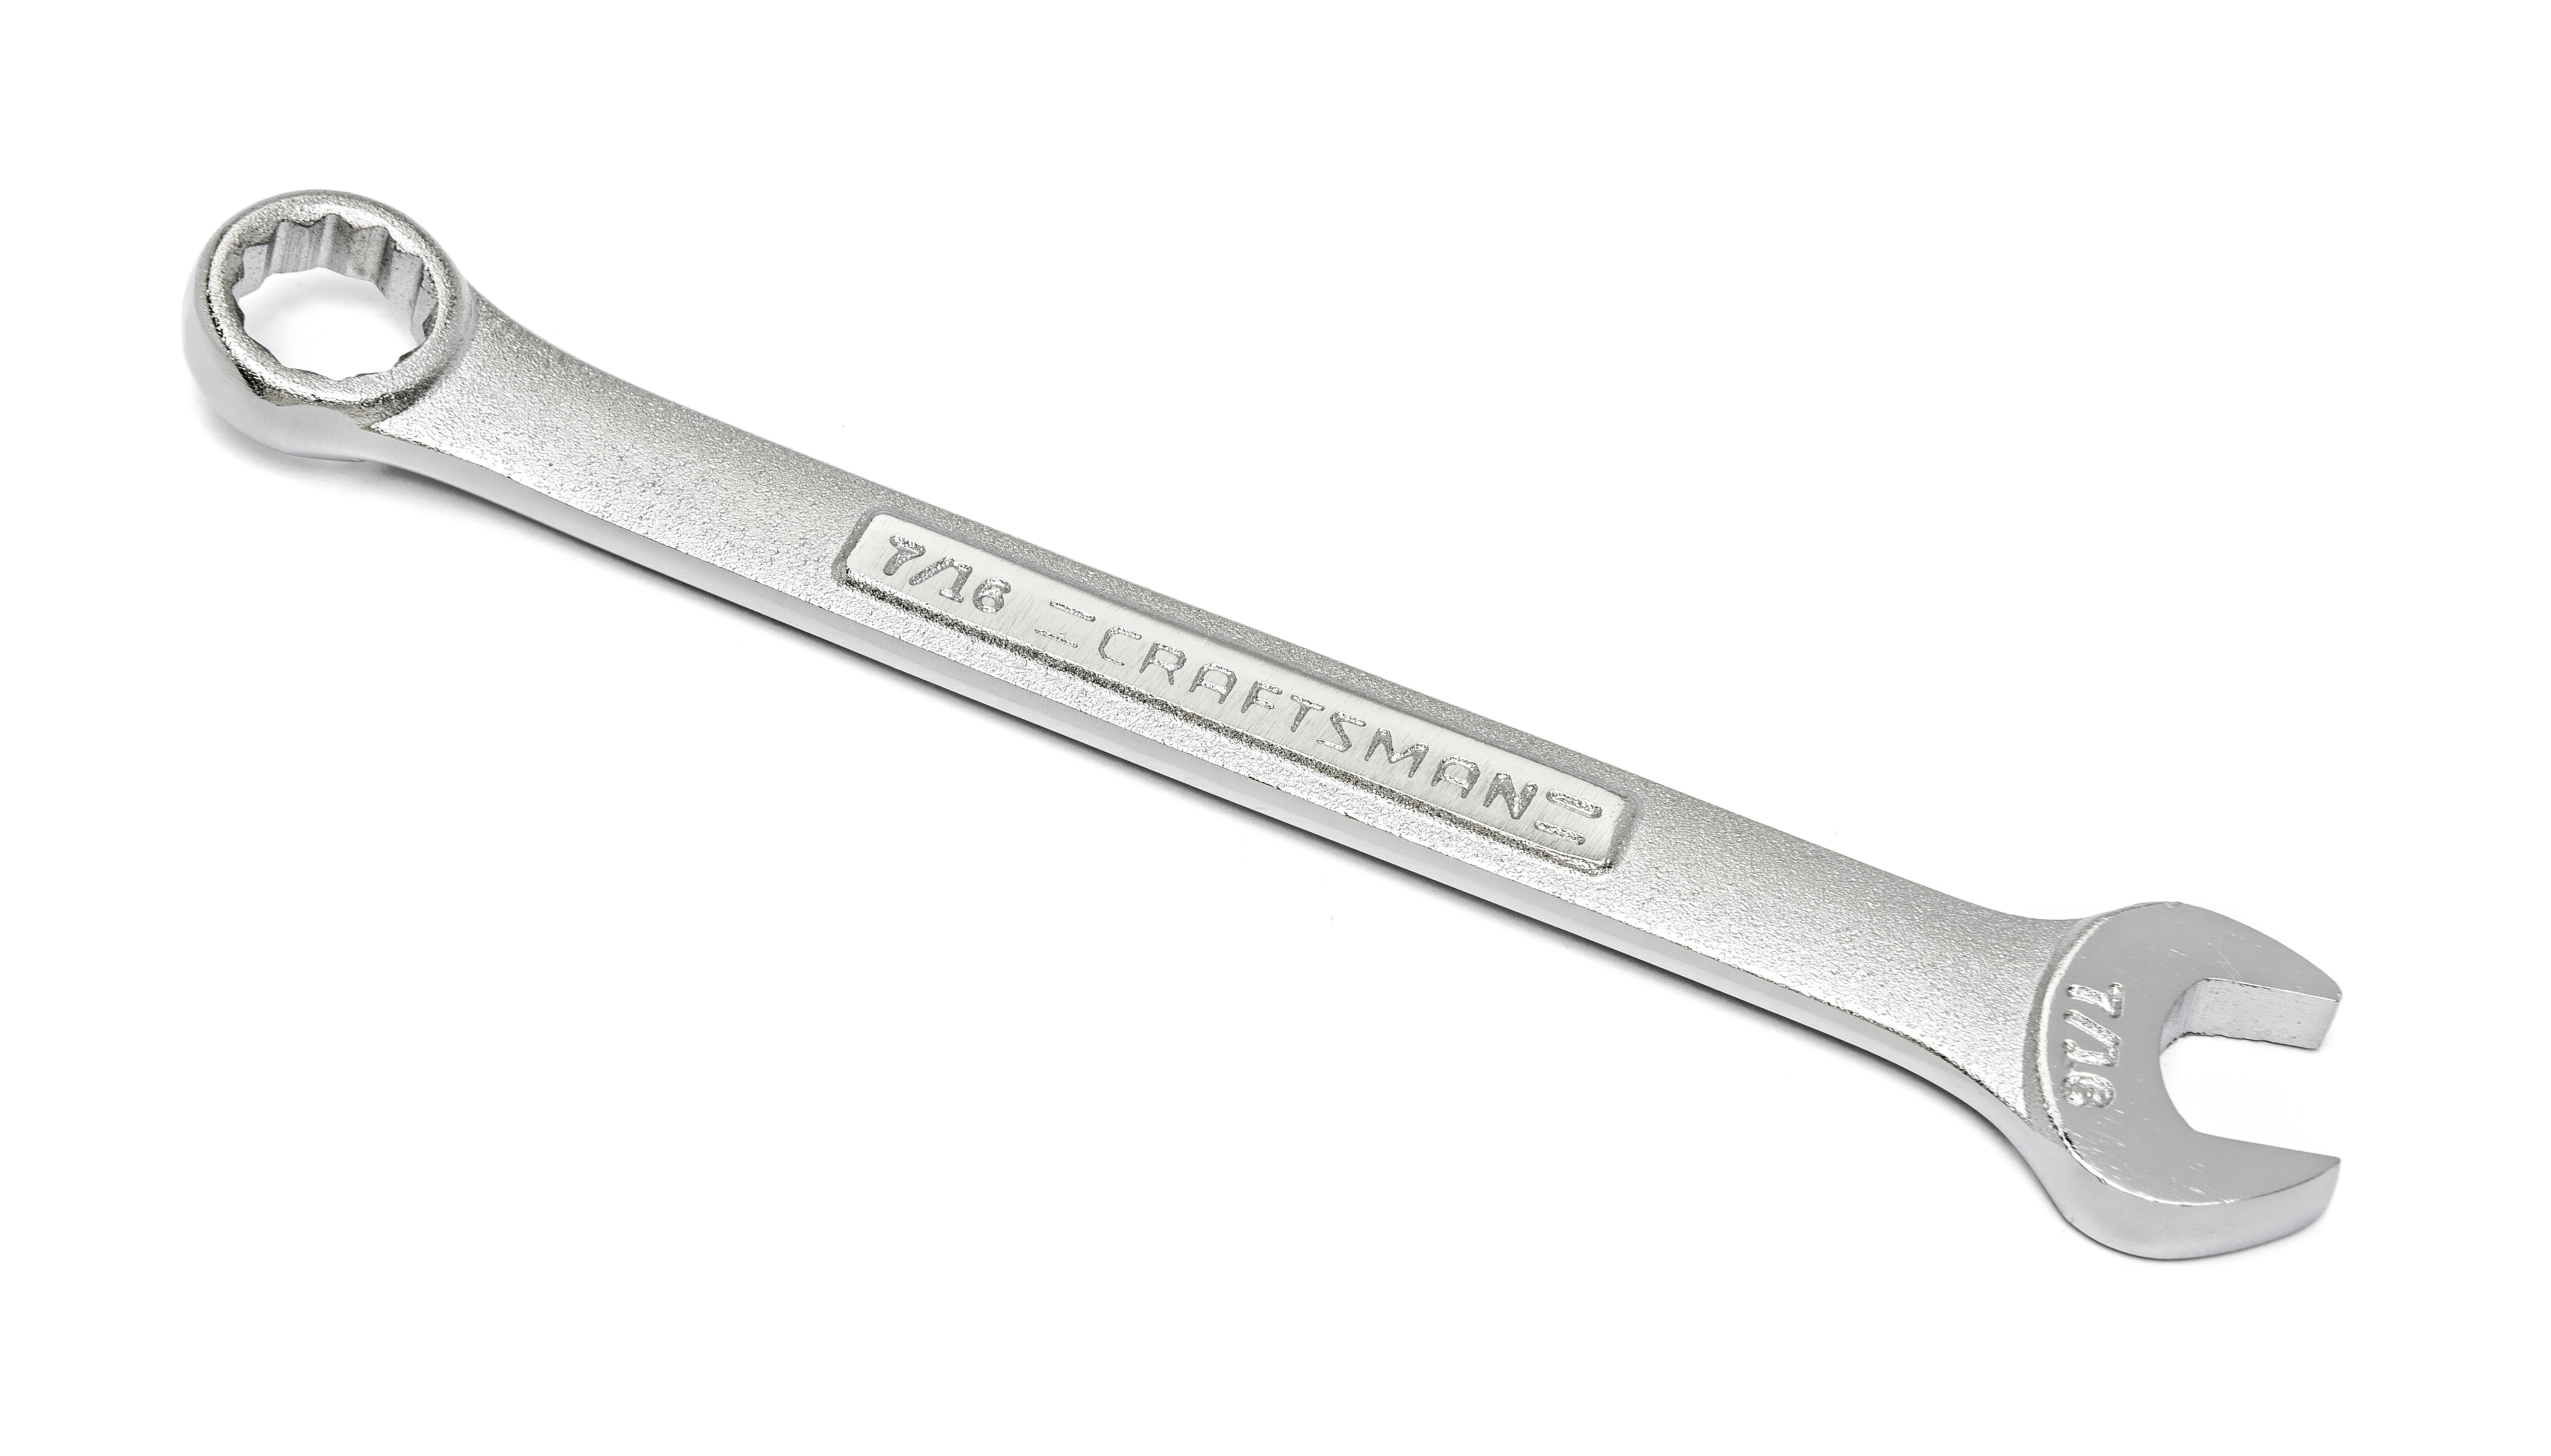 Craftsman 7/16" 12 Point Combination Wrench